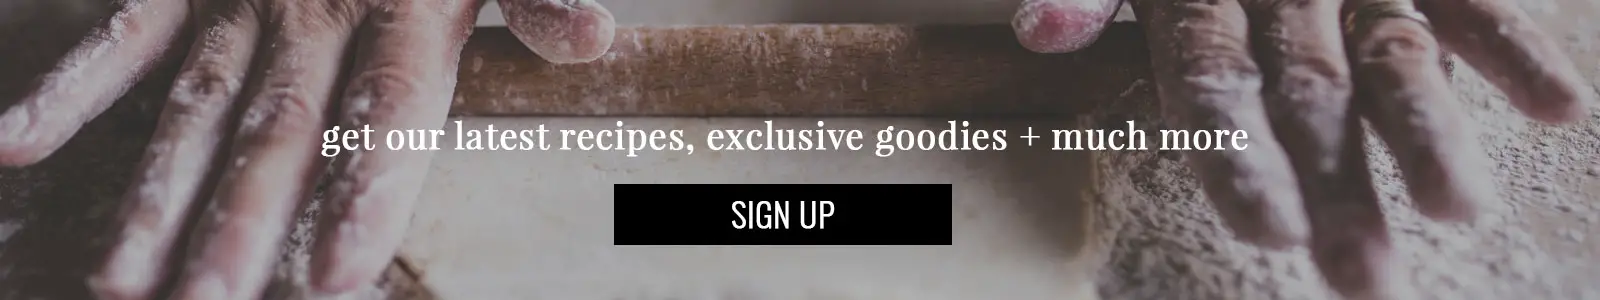 Sign up for our latest recipes, exclusive offers and much, much more